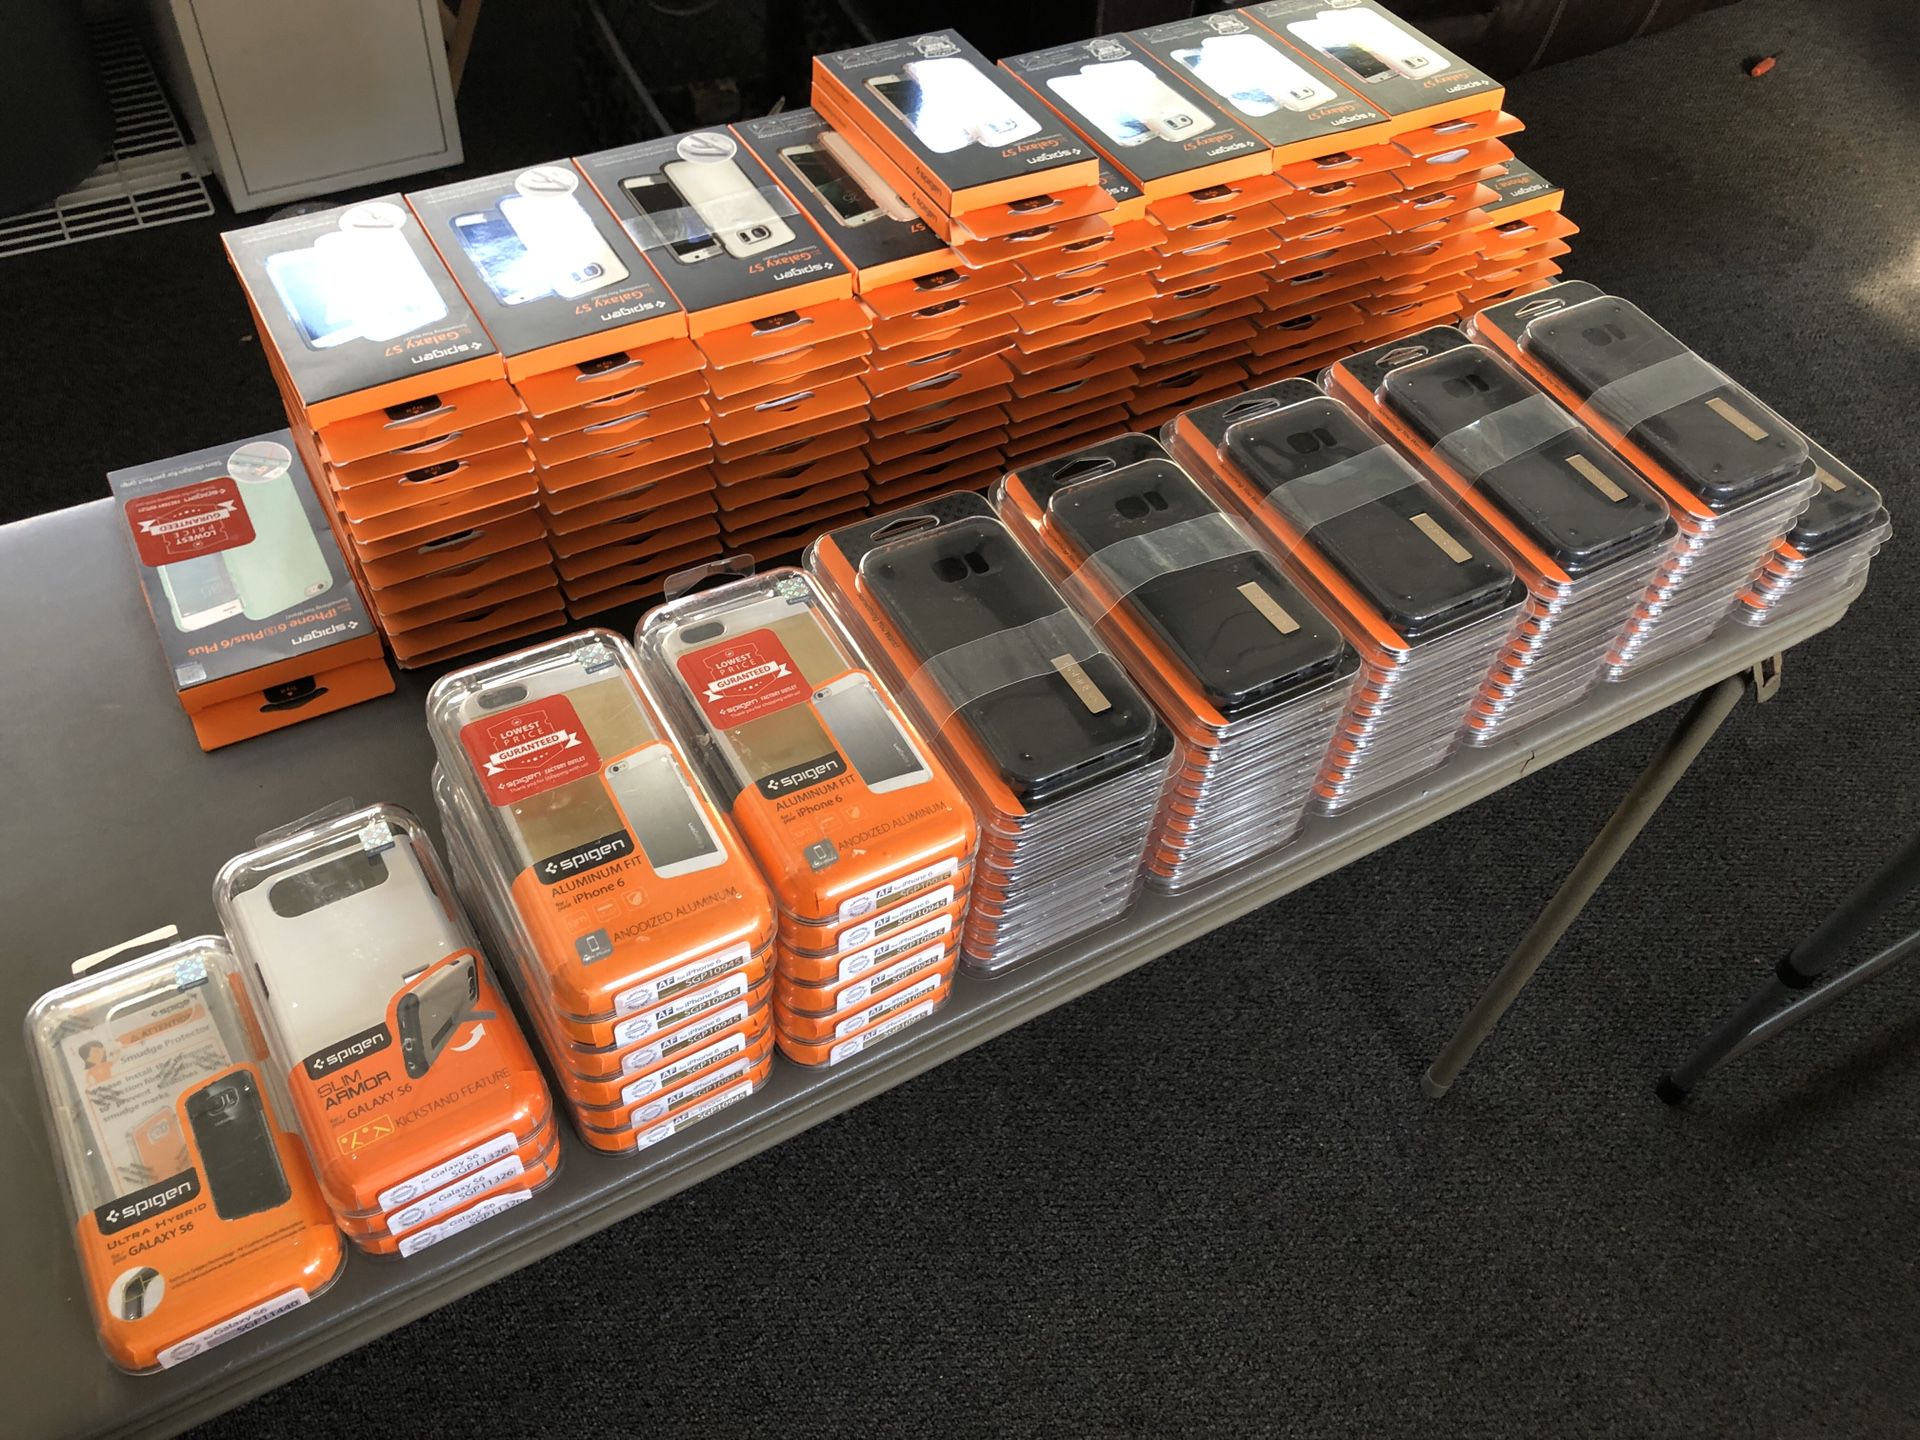 150 Spigen Galaxy S6/7, iPhone 6/7 cases Brand New in Boxes